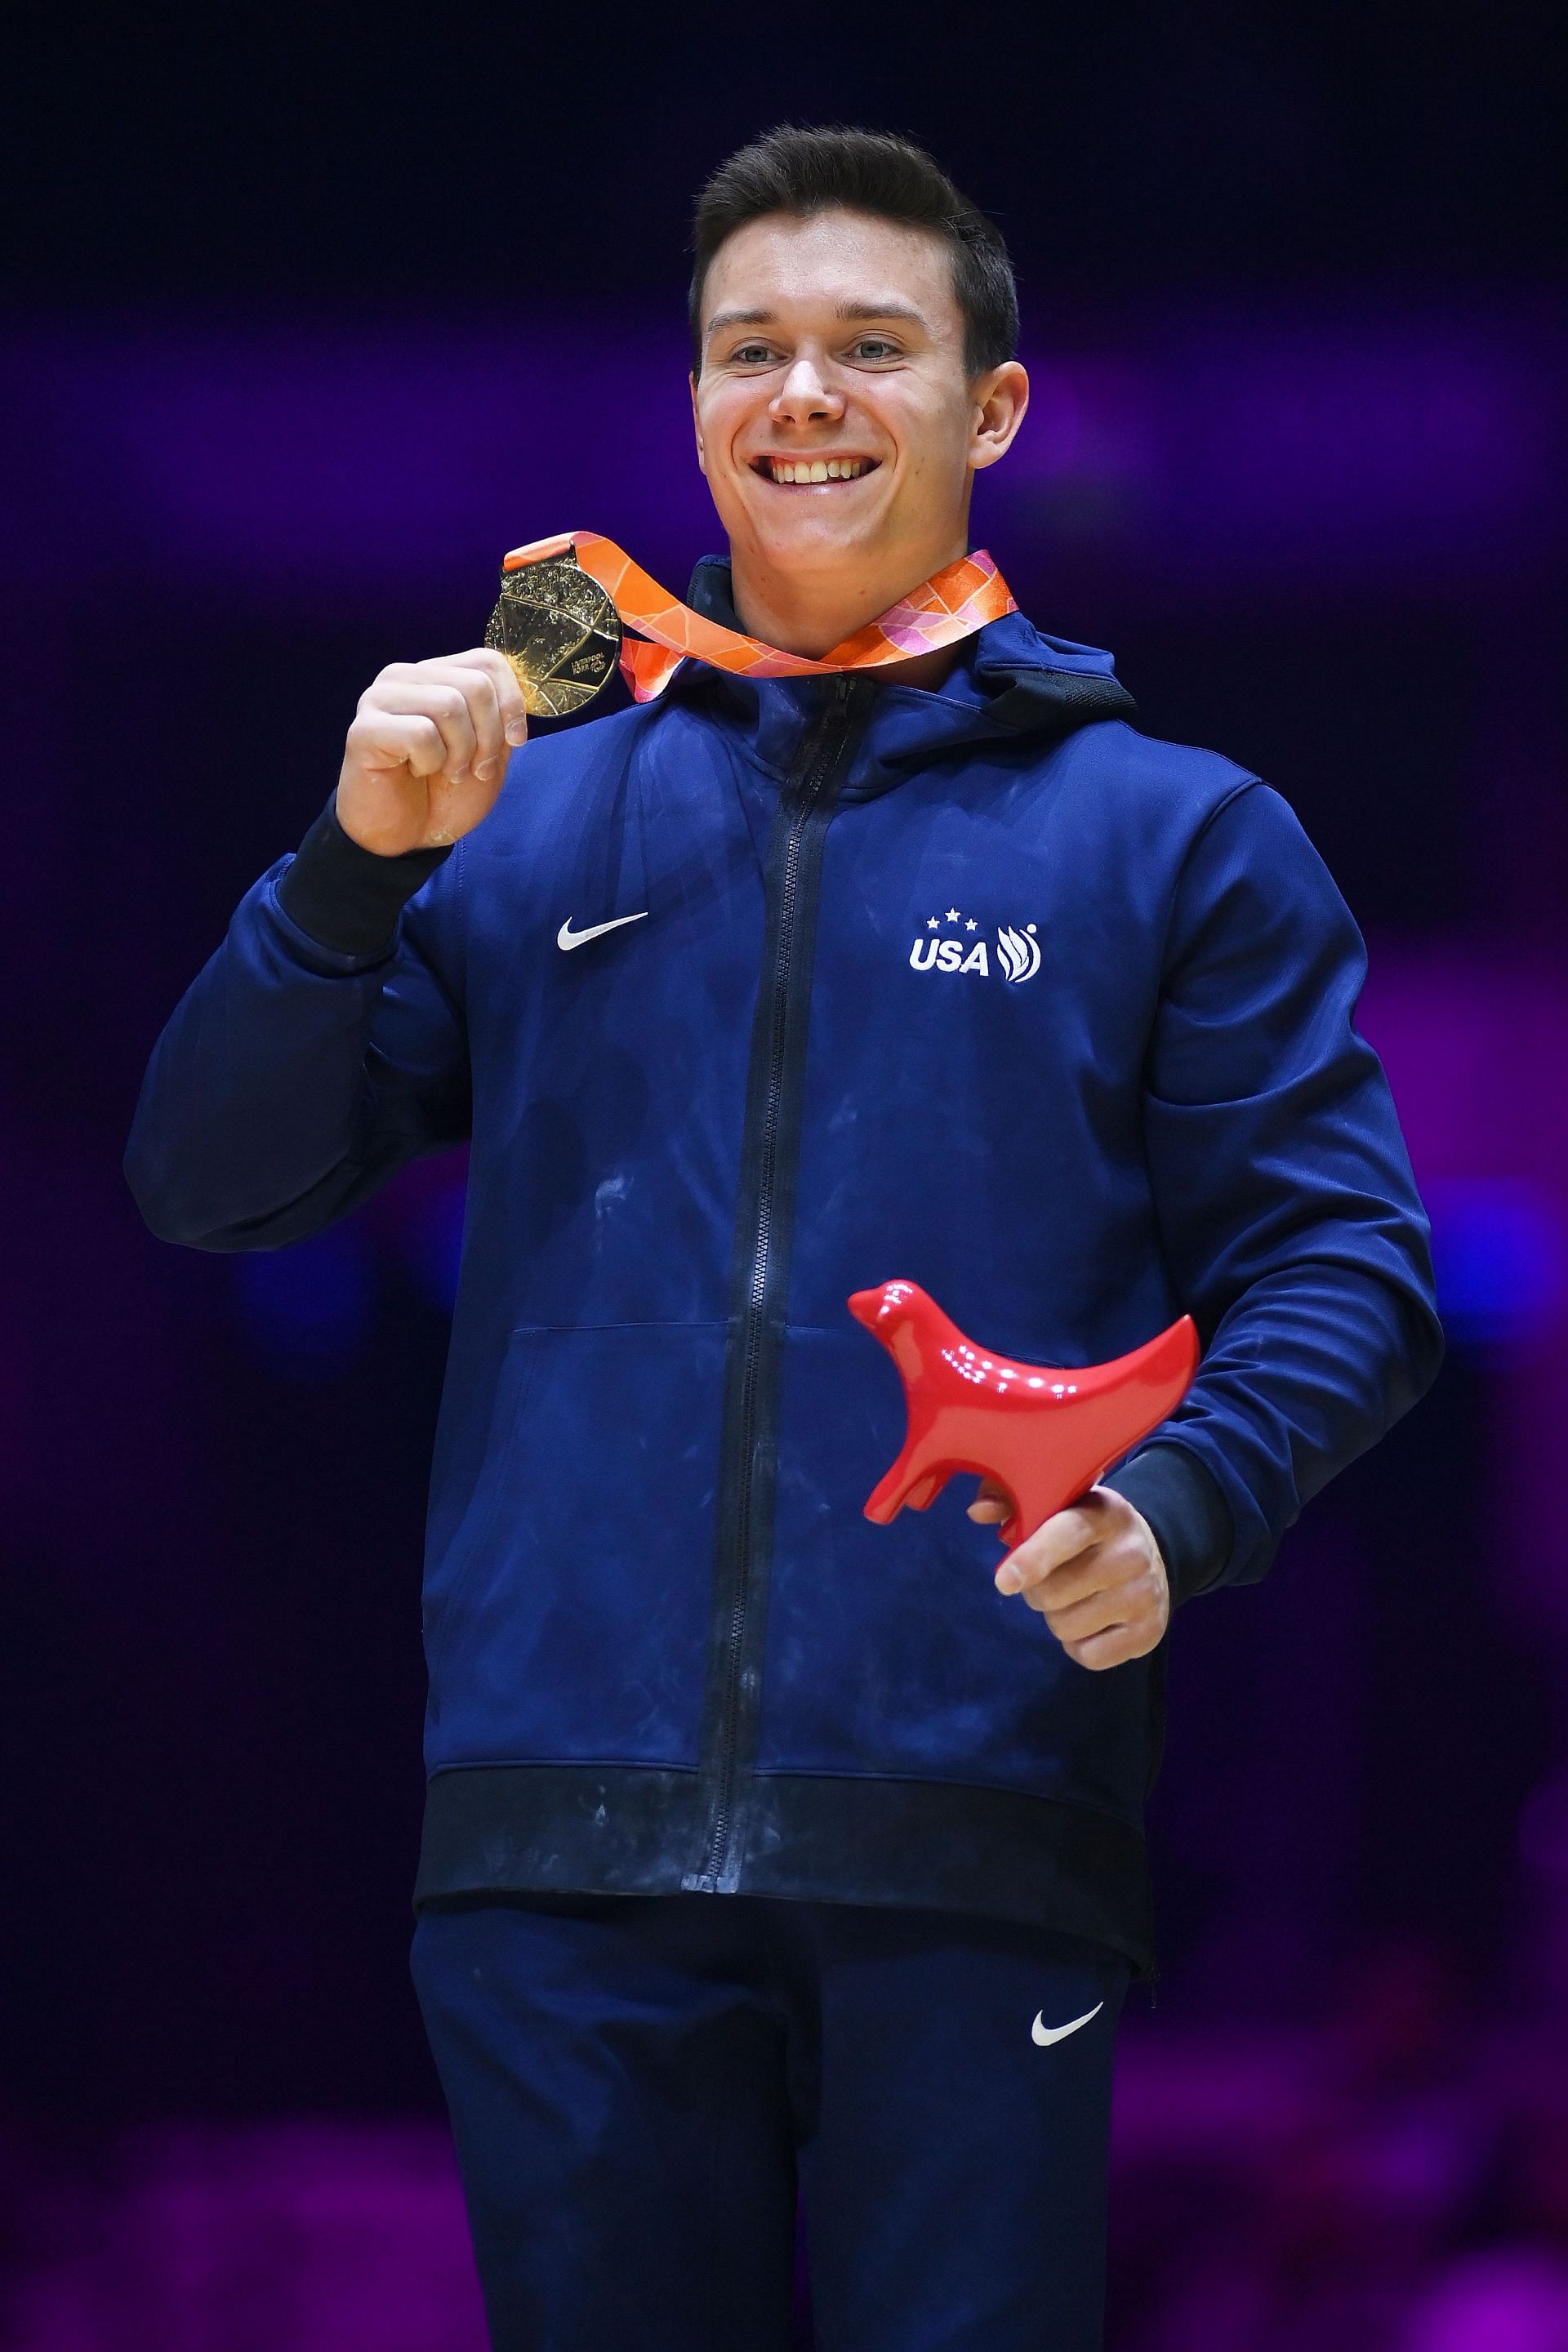  Gold medalist Brody Malone of United States poses during the medal ceremony for Men's High Bar Final on day nine of the 2022 Gymnastic World Championships at M&S Bank Arena on November 06, 2022 in Liverpool, England. (Photo by Laurence Griffiths/Getty Images)